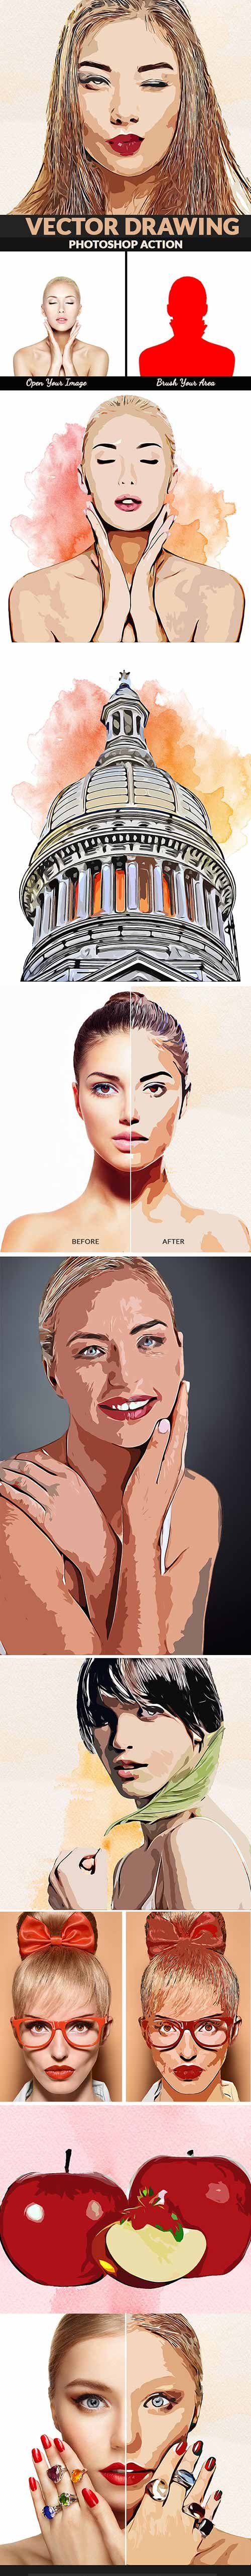 GraphicRiver - Vector Drawing Photoshop Action 22405523